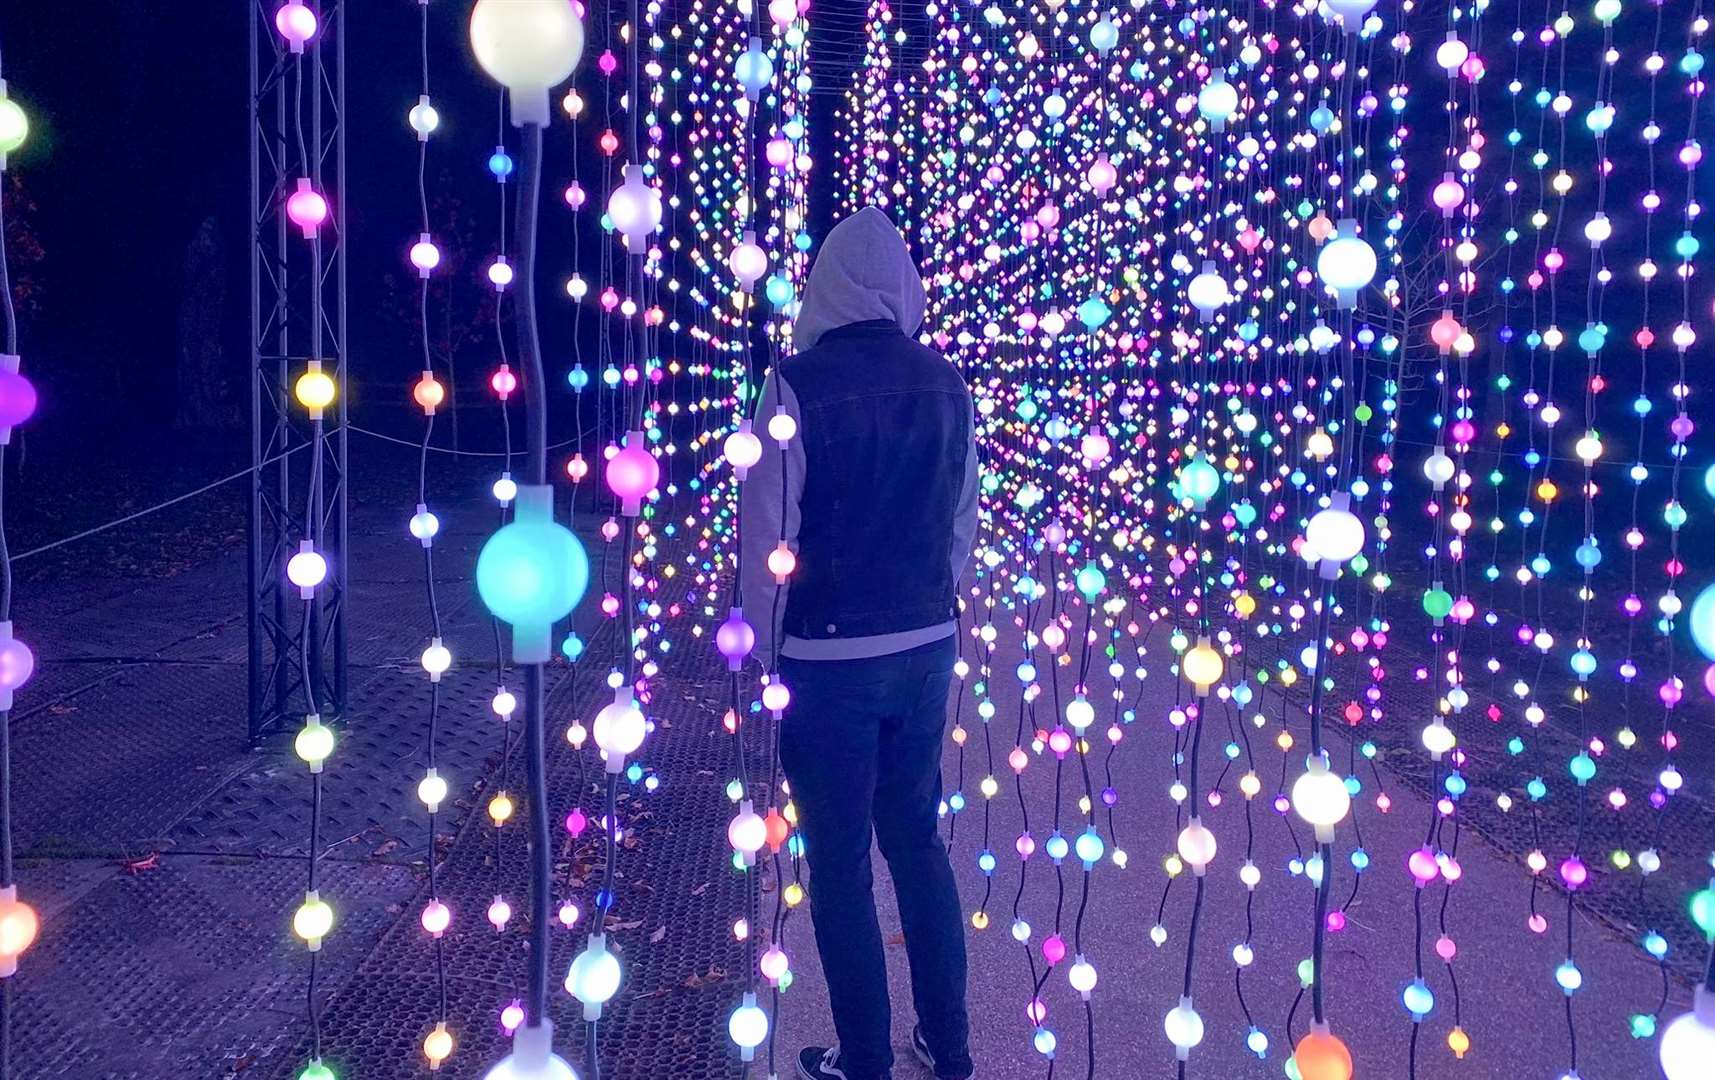 The Feast of Light wall of hanging lights was fun and immersive